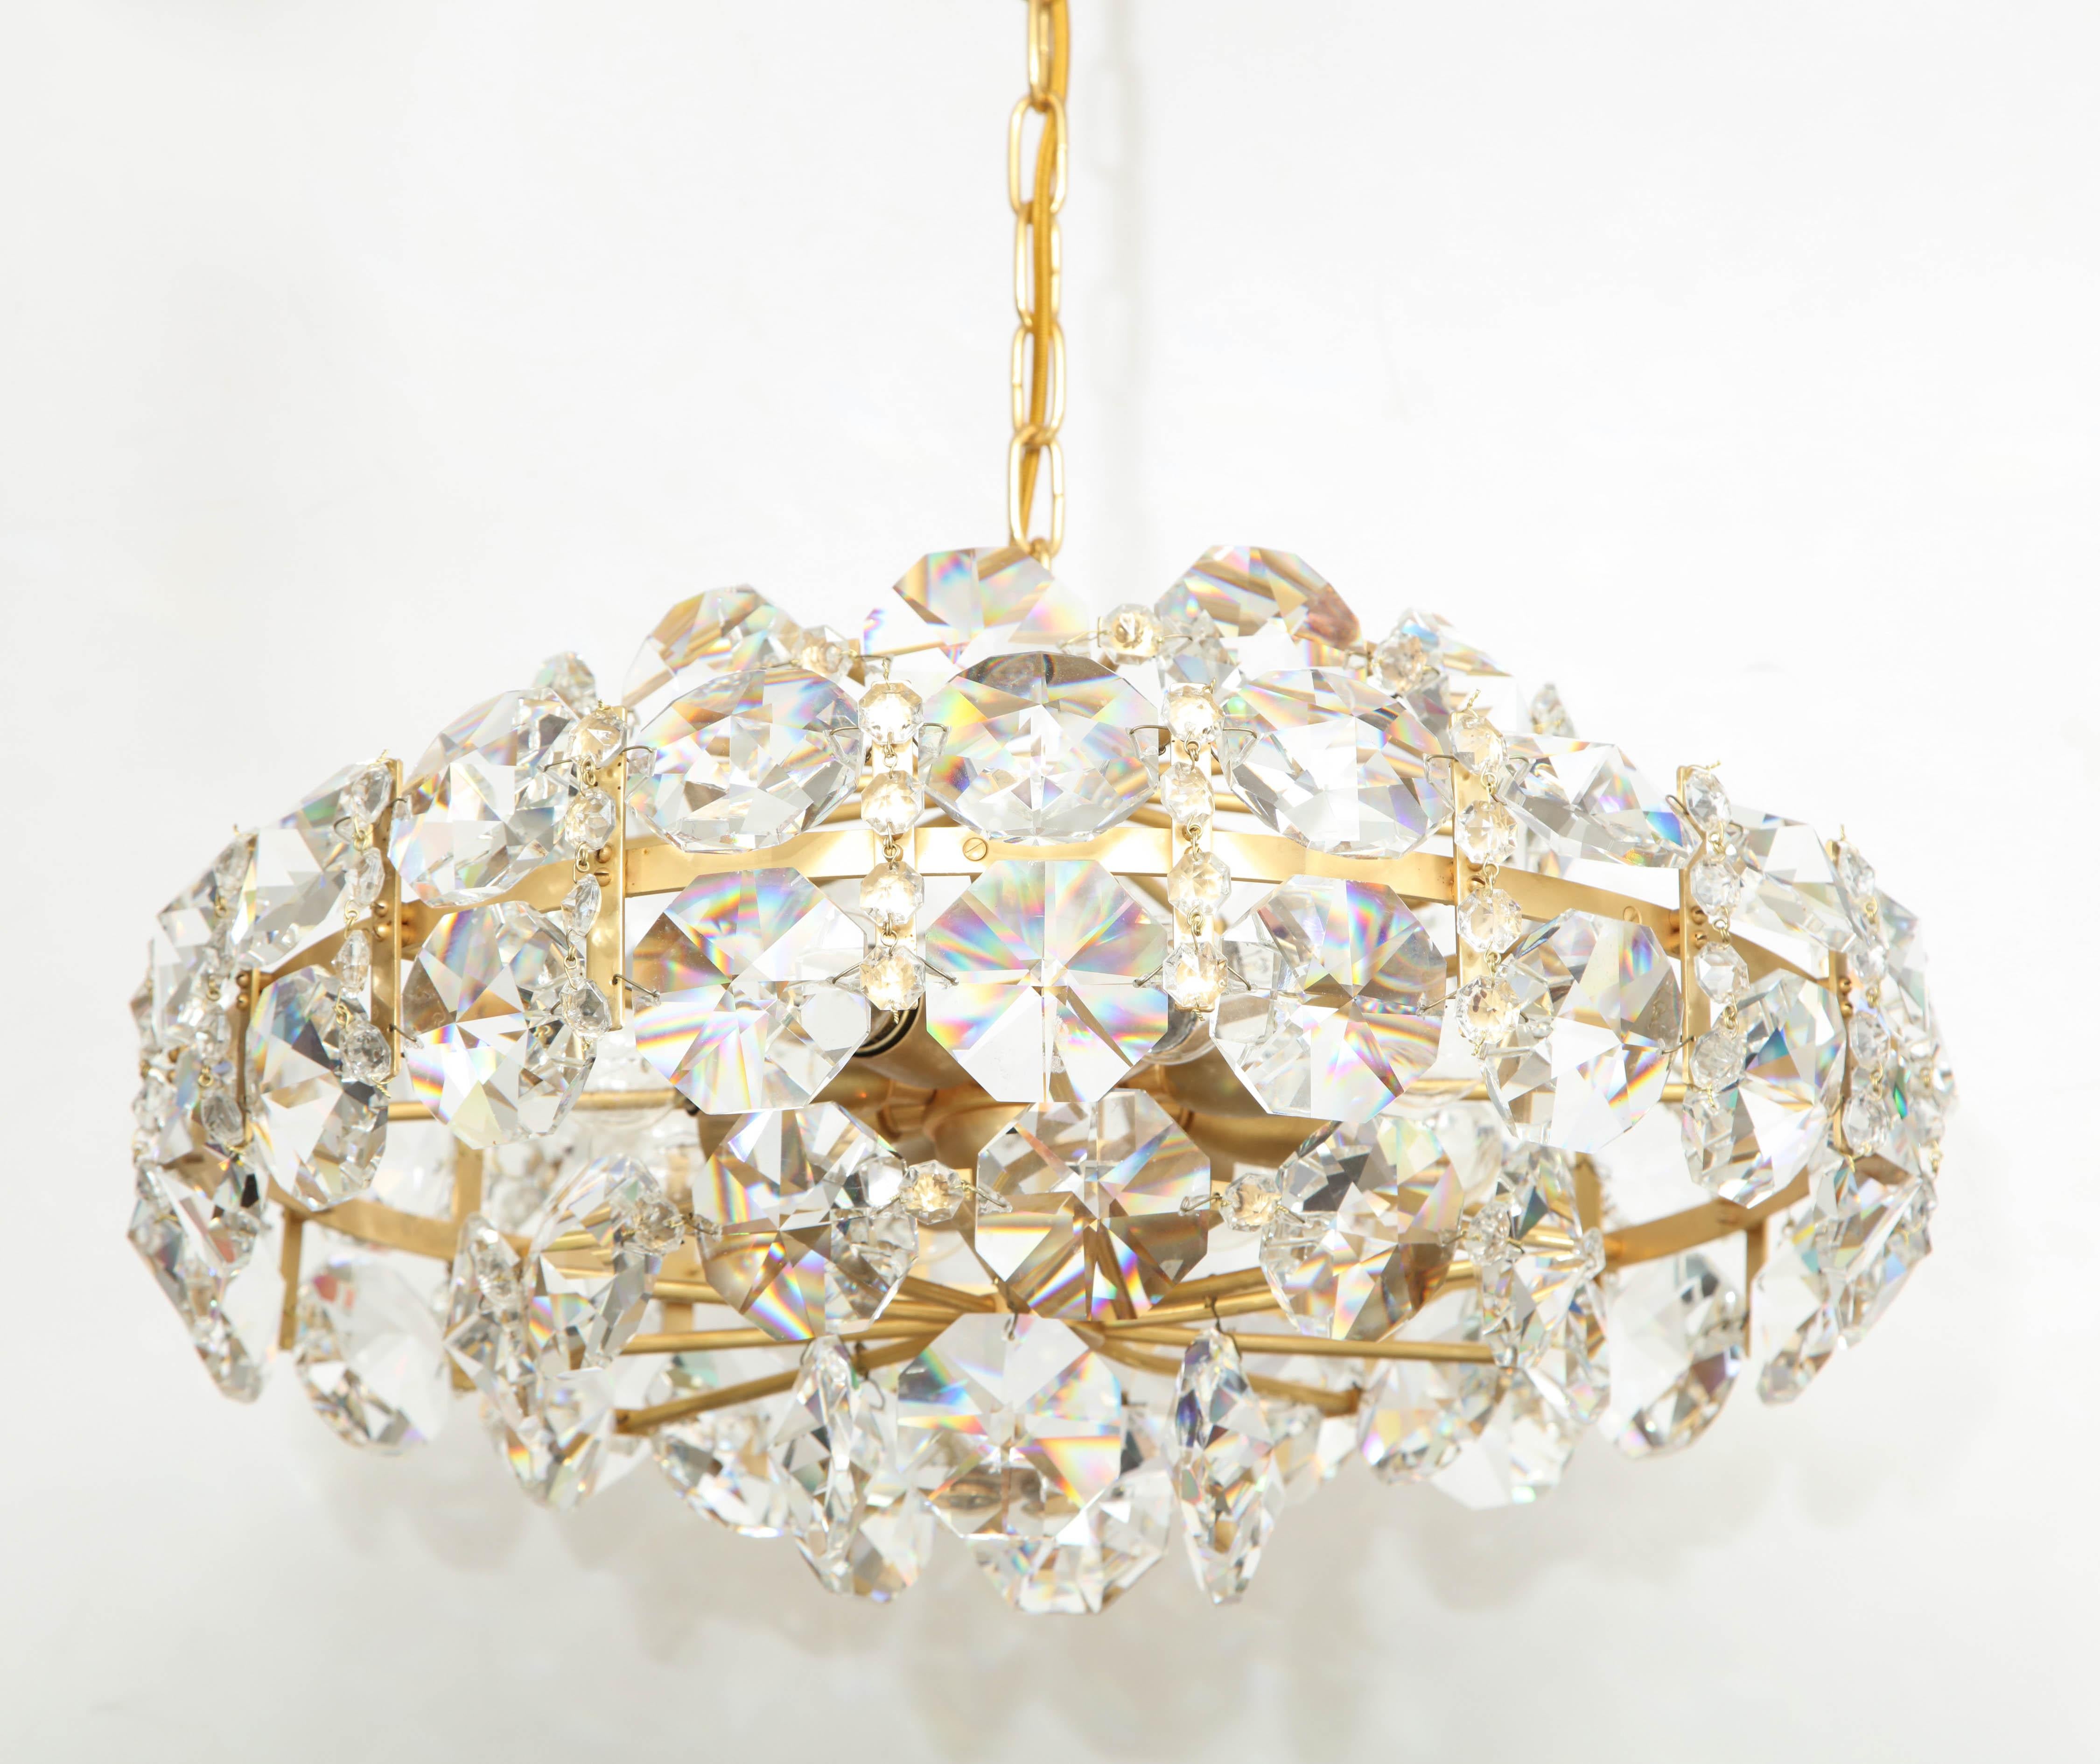 Dramatic Scandinavian Modern chandelier featuring large-scale octagonal faceted crystals on a 22-karat gold washed brass frame and chain. Rewired for use in the USA using 8 candelabra type bulbs.

Chandelier body measures 12 inches tall, 